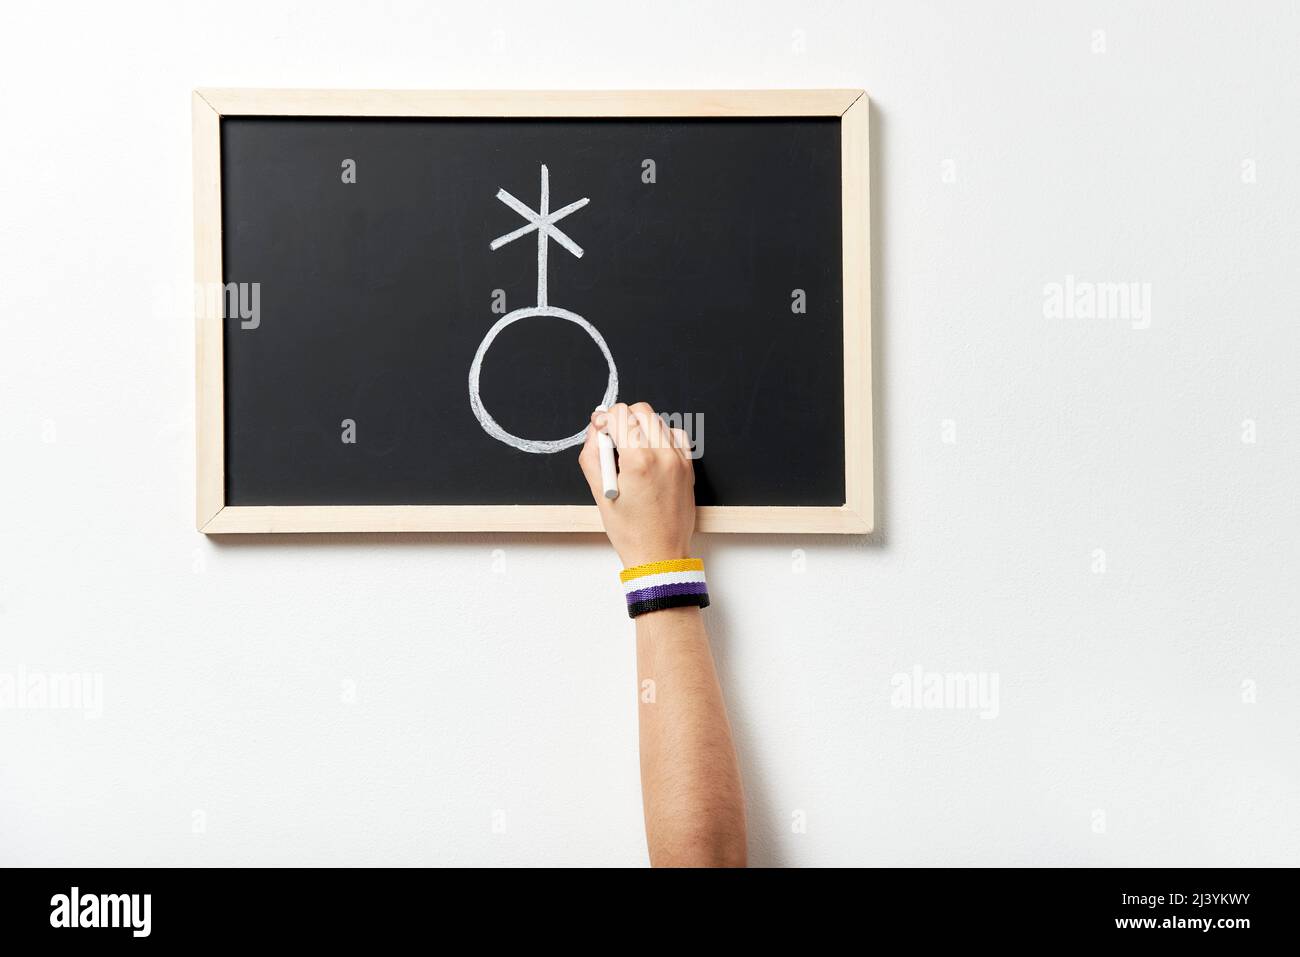 Hand with symbolic bracelet drawing on a chalkboard the symbol of the non-binary or genderqueer community Concept of respect for gender diversity. Stock Photo